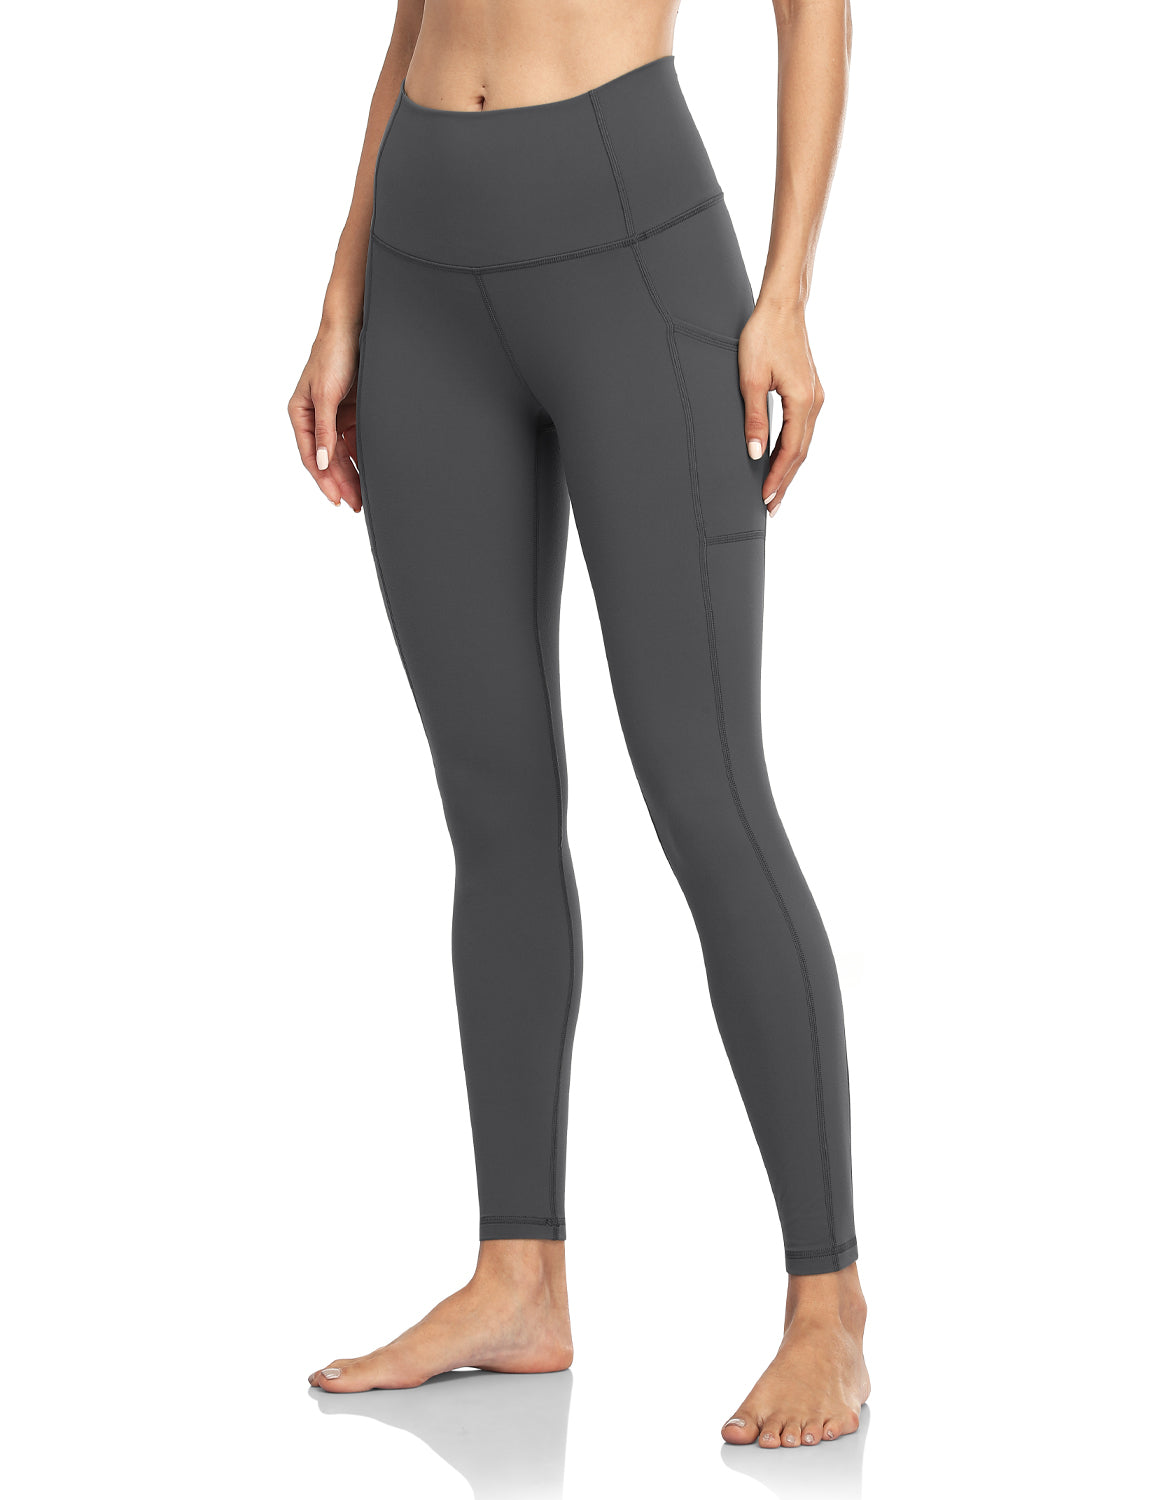 HeyNuts Essential Full Length Yoga Leggings, Women's High Waisted Workout  Compression Pants 28'', True Navy, M : Buy Online at Best Price in KSA -  Souq is now : Fashion